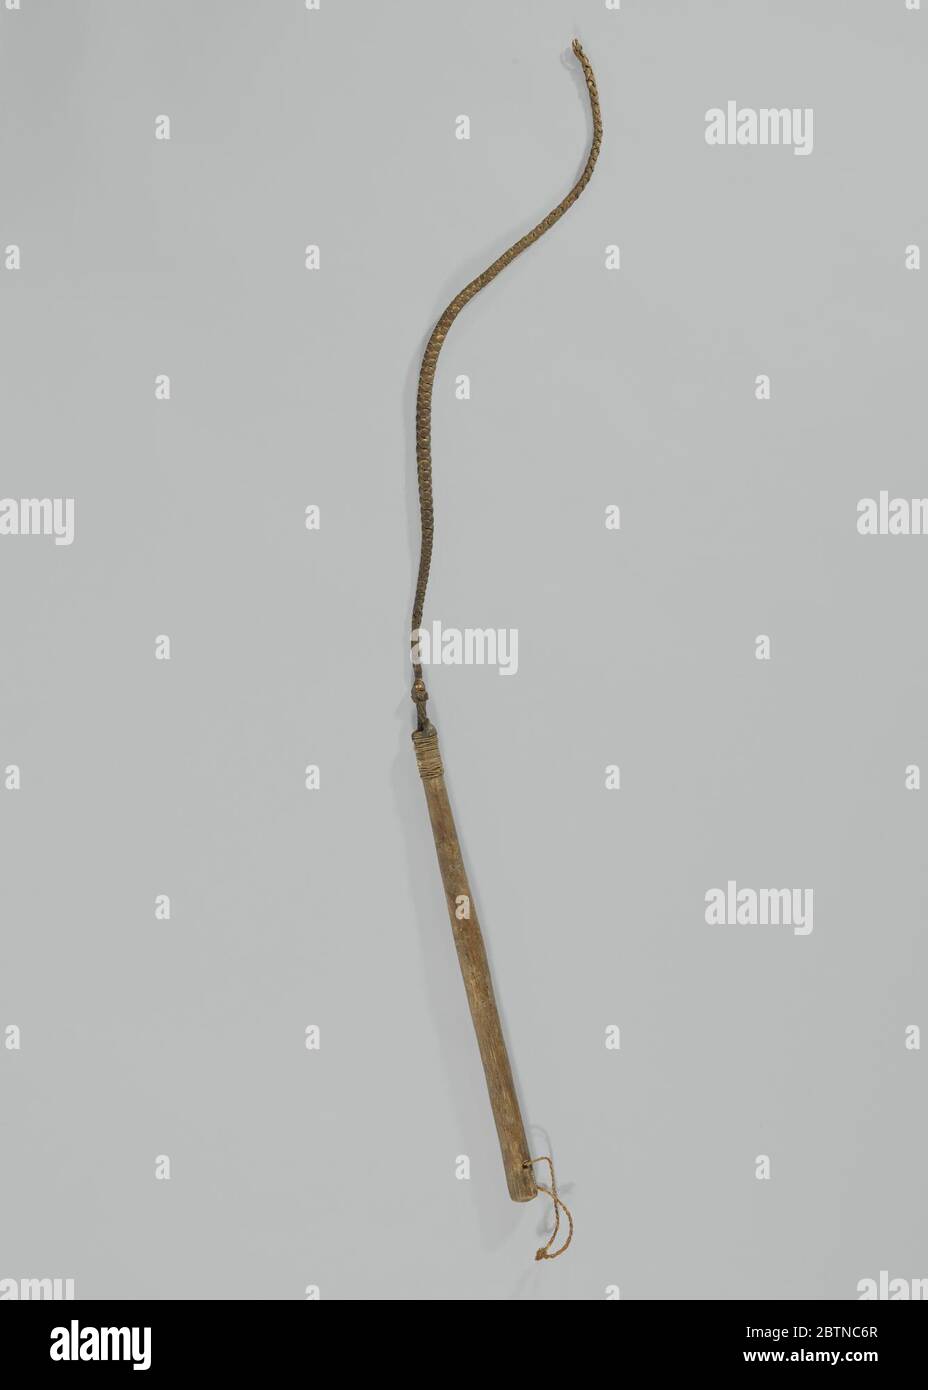 Slave whip owned by British abolitionist Charles James Fox. Braided hide whip with wooden handle. A small ring of hide has been put through a hole at the end of the handle, presumably for storing the whip by hanging. Stock Photo